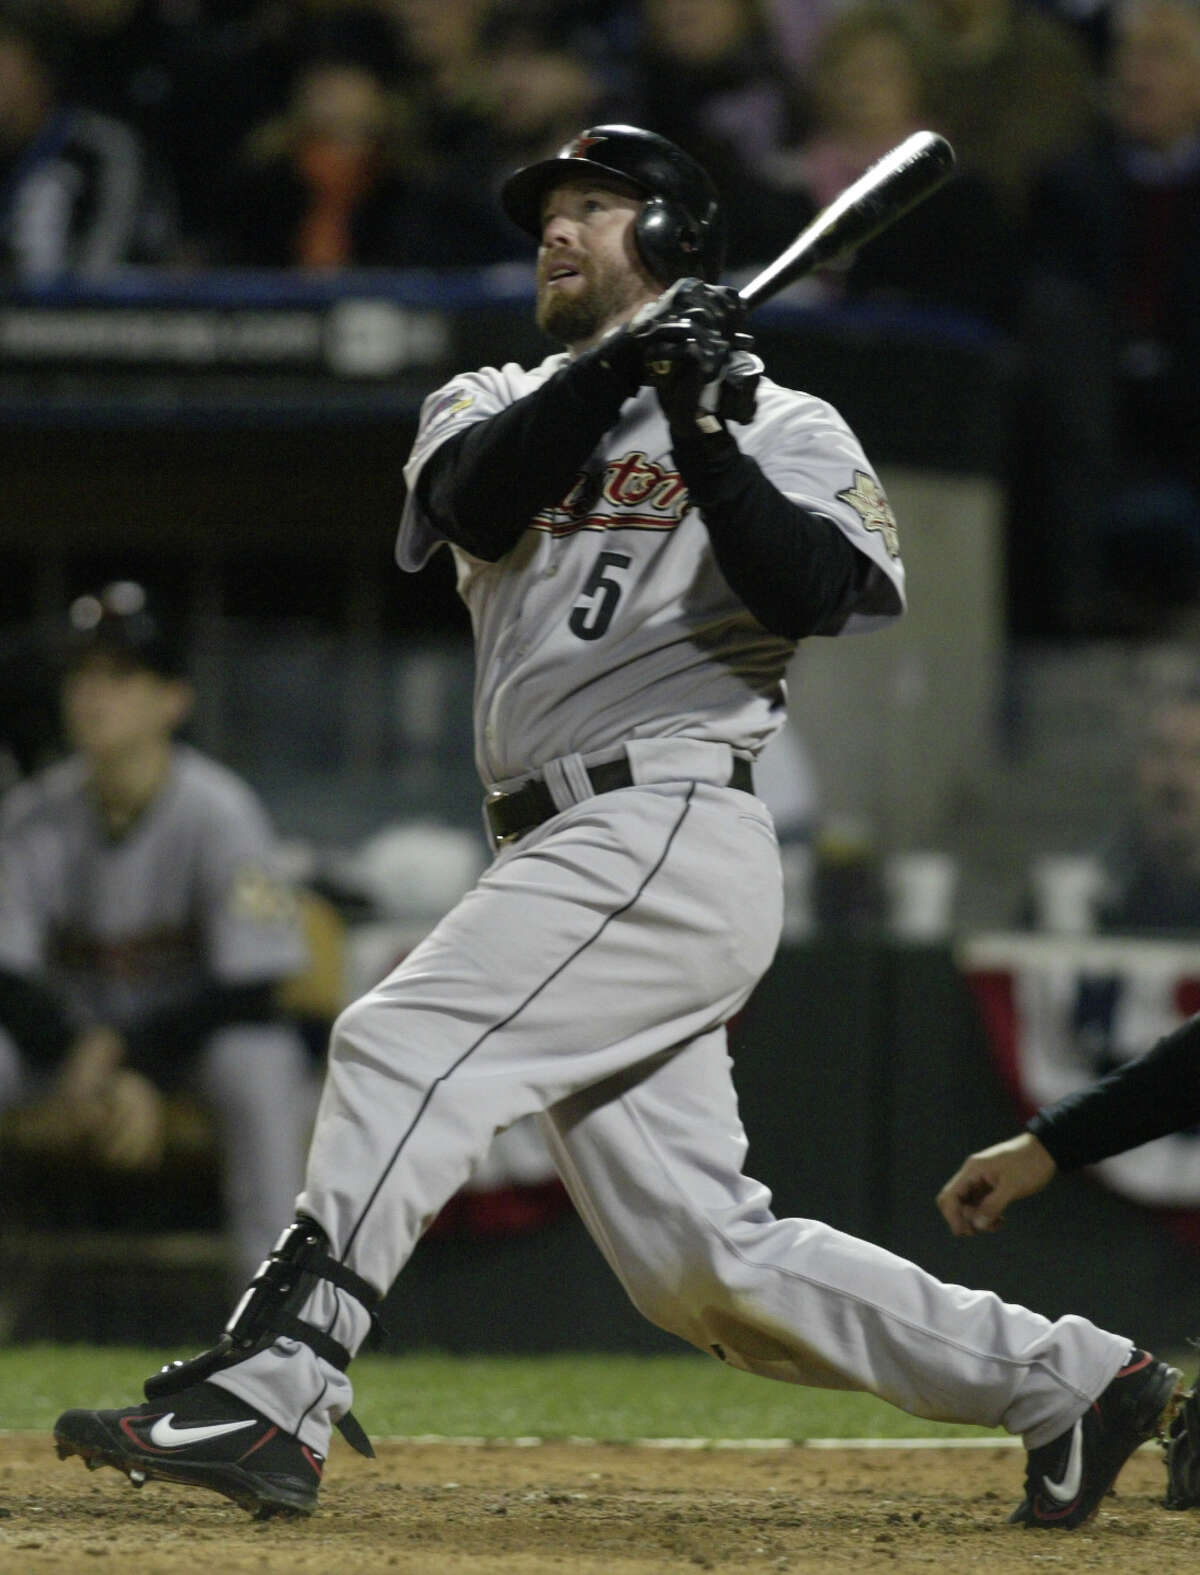 10/22/05--Houston Astros designated hitter Jeff Bagwell watches his pop fly to Chicago White Sox left fielder Scott Podsednik during the fourth inning of Game One of the World Series at U.S. Cellular Field in Chicago Saturday, October 22, 2005. (Karen Warren/Houston Chronicle) HOUCHRON CAPTION (10/23/2005-4 STAR, 1ST R.O.) SECSPECIAL: MIGHTY CUT: Jeff Bagwell went 0-for-2 and was twice hit by pitches as the Astros' DH in Game 1.